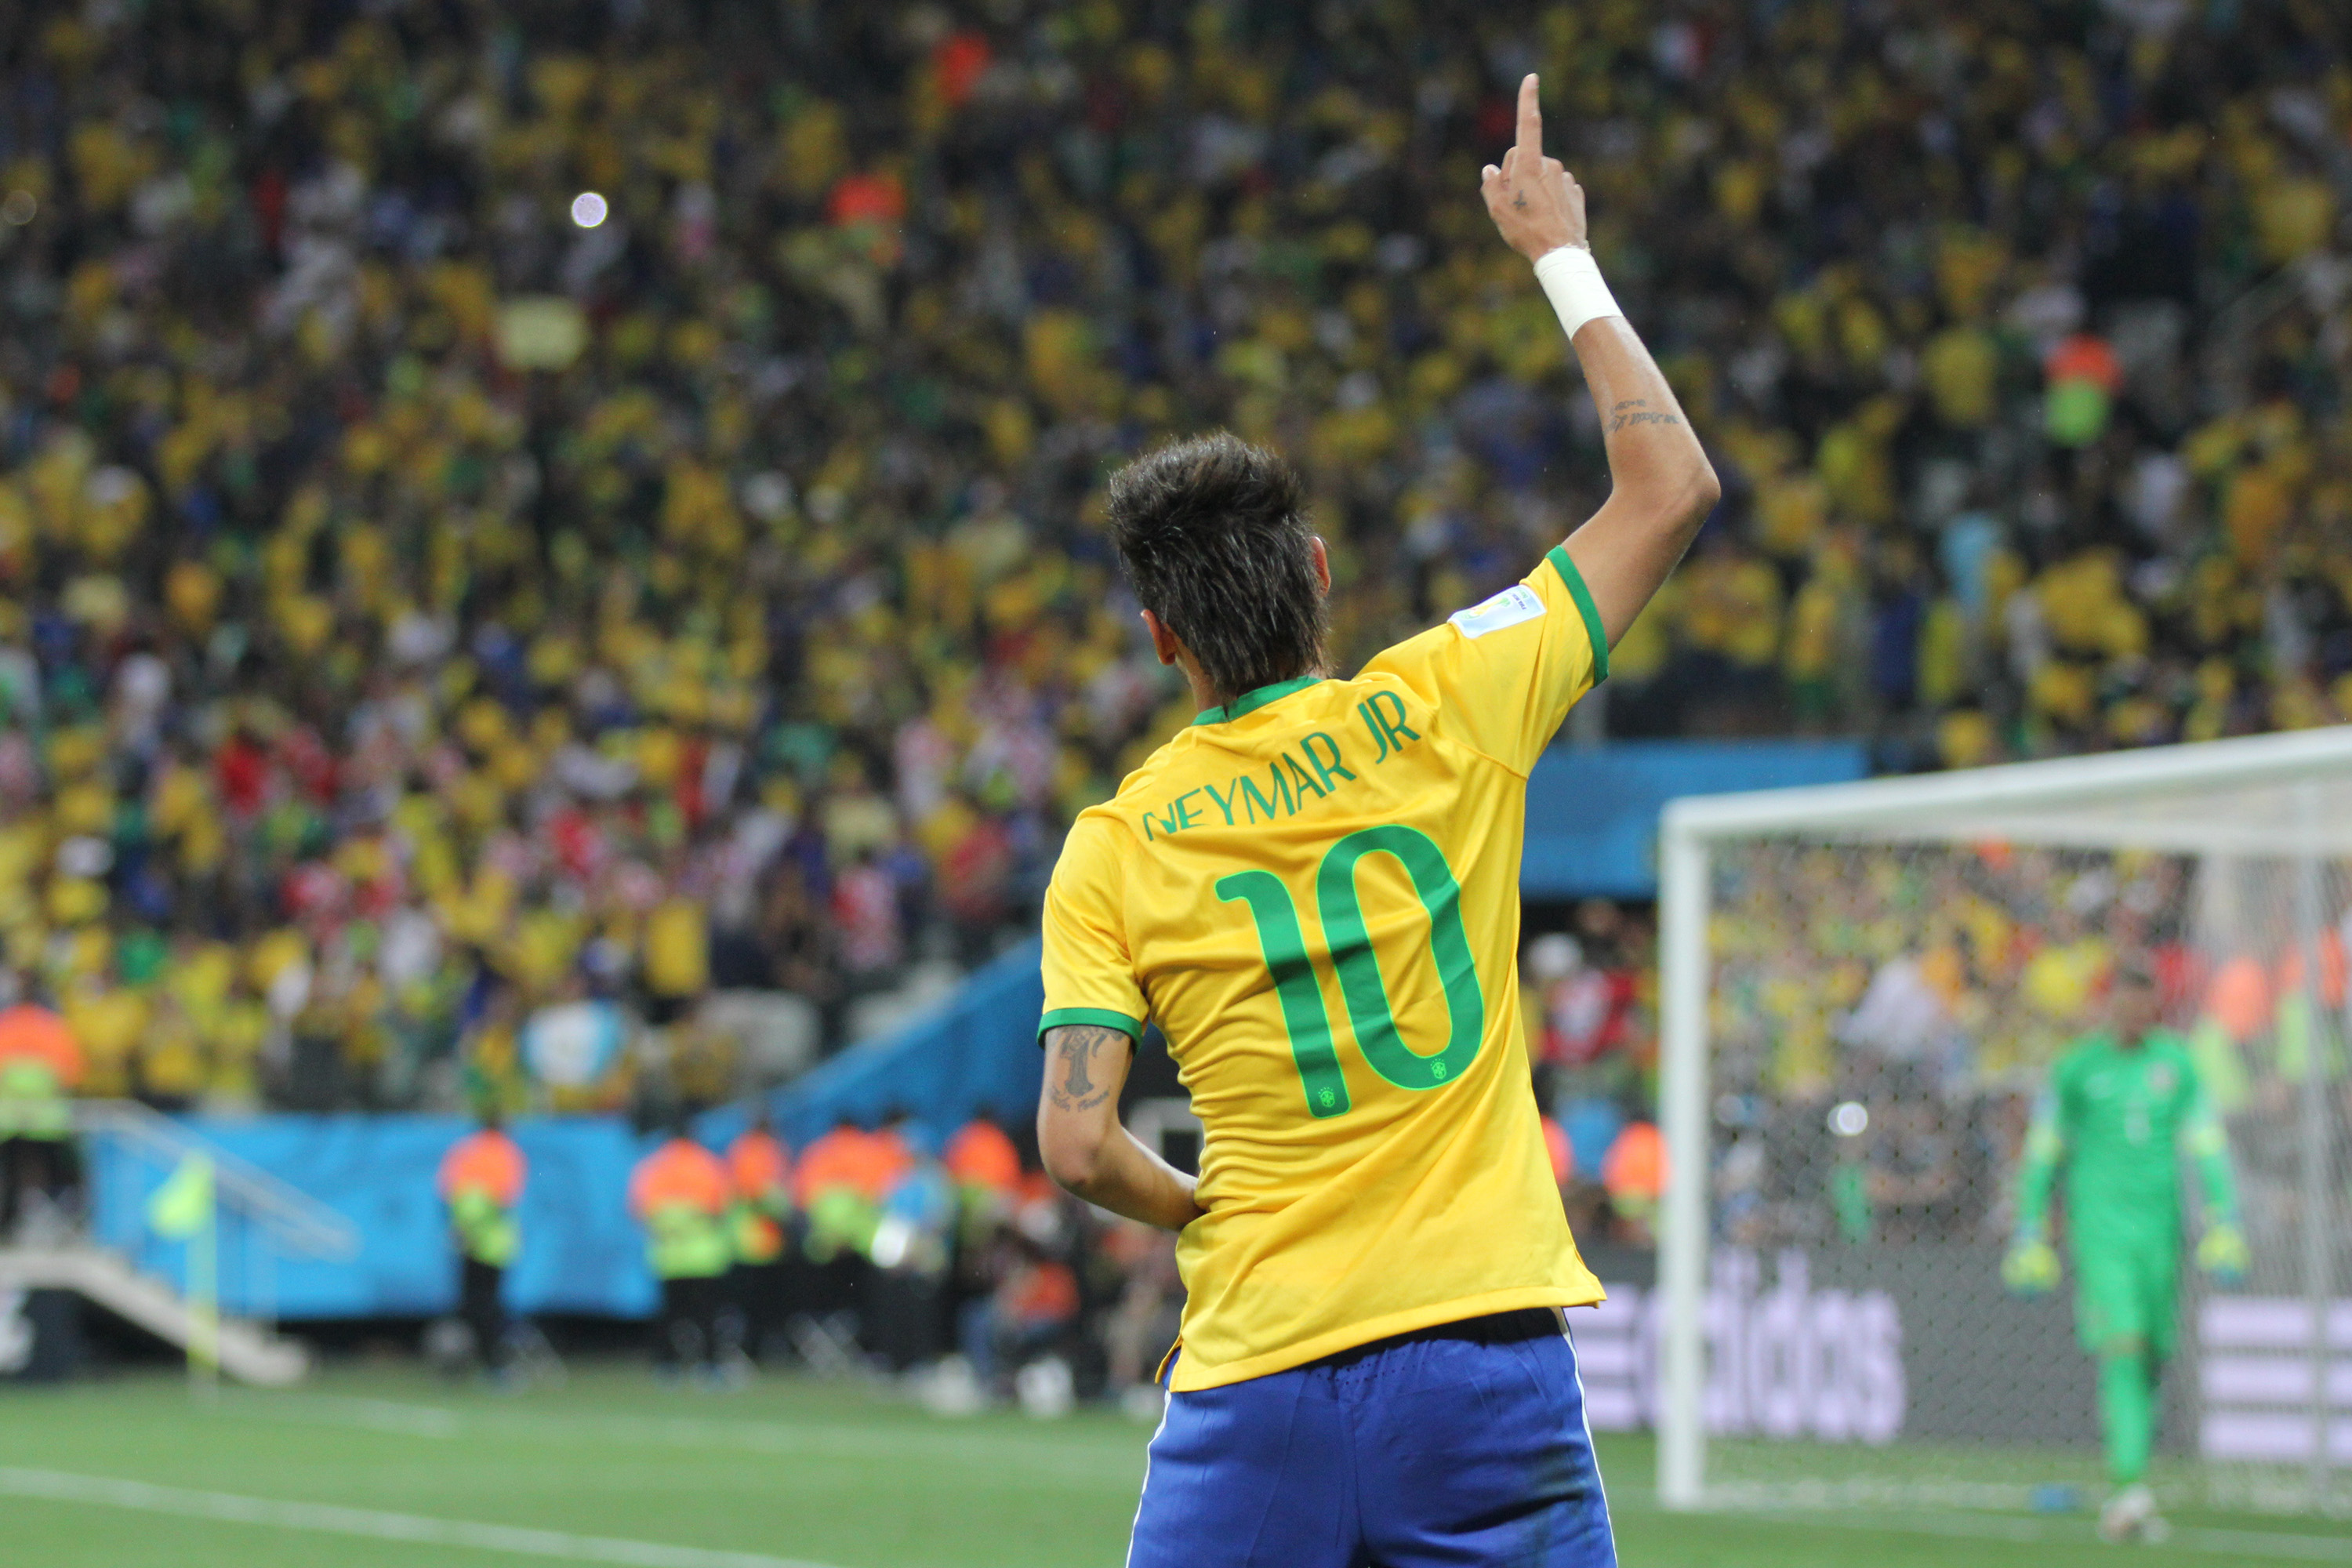 The 2014 World Cup in Brazil: its legacy and challenges | Heinrich ...